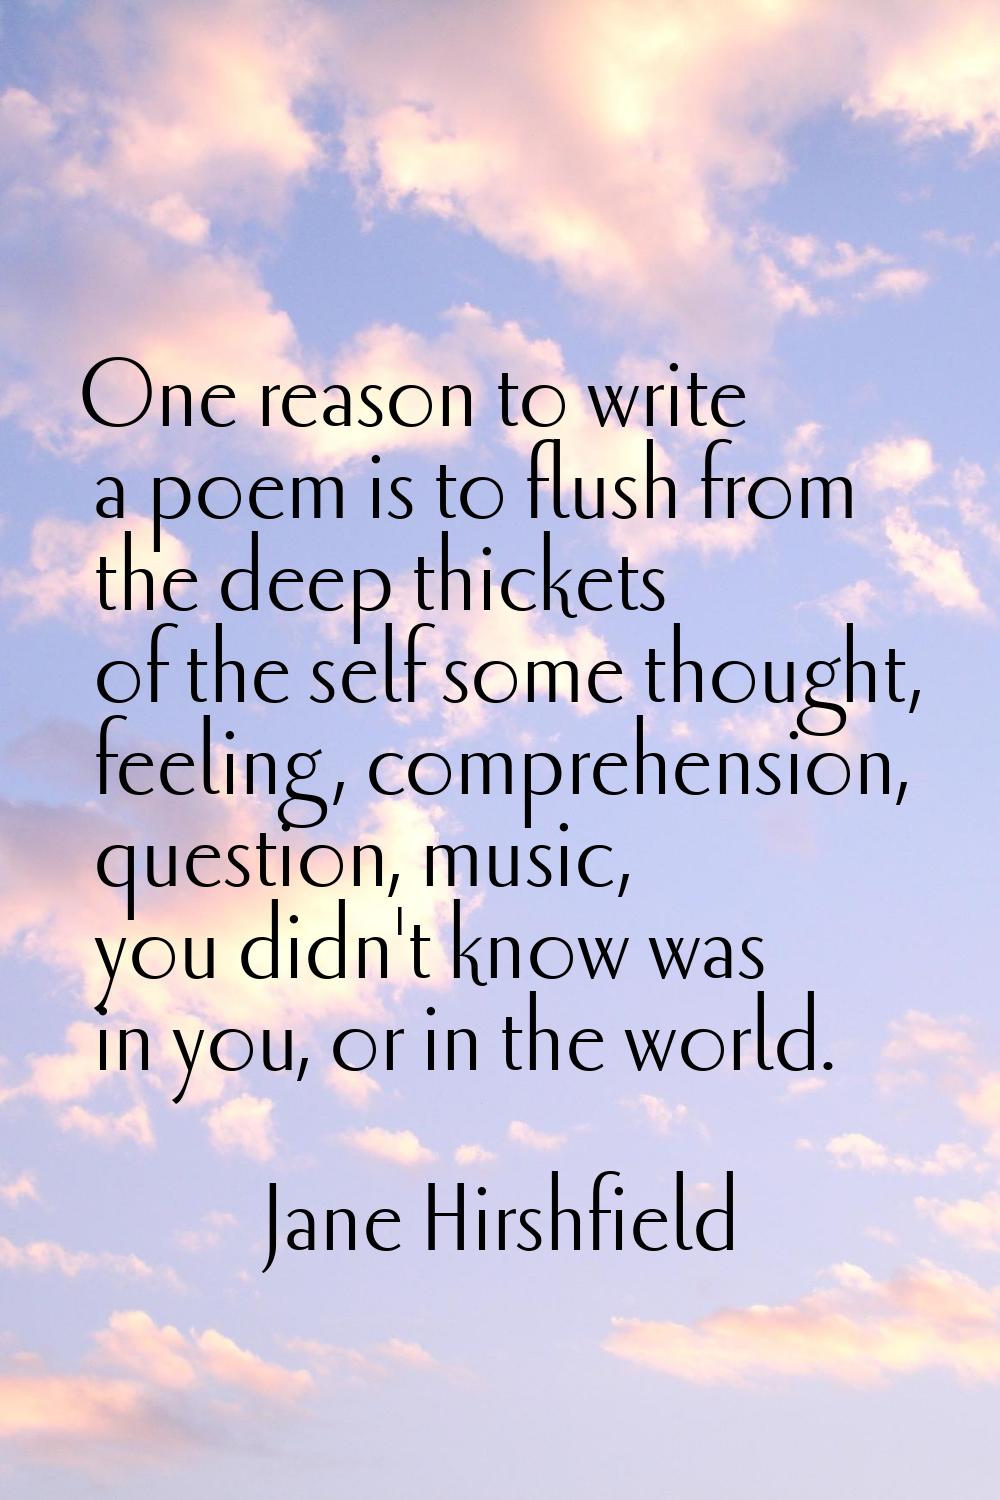 One reason to write a poem is to flush from the deep thickets of the self some thought, feeling, co